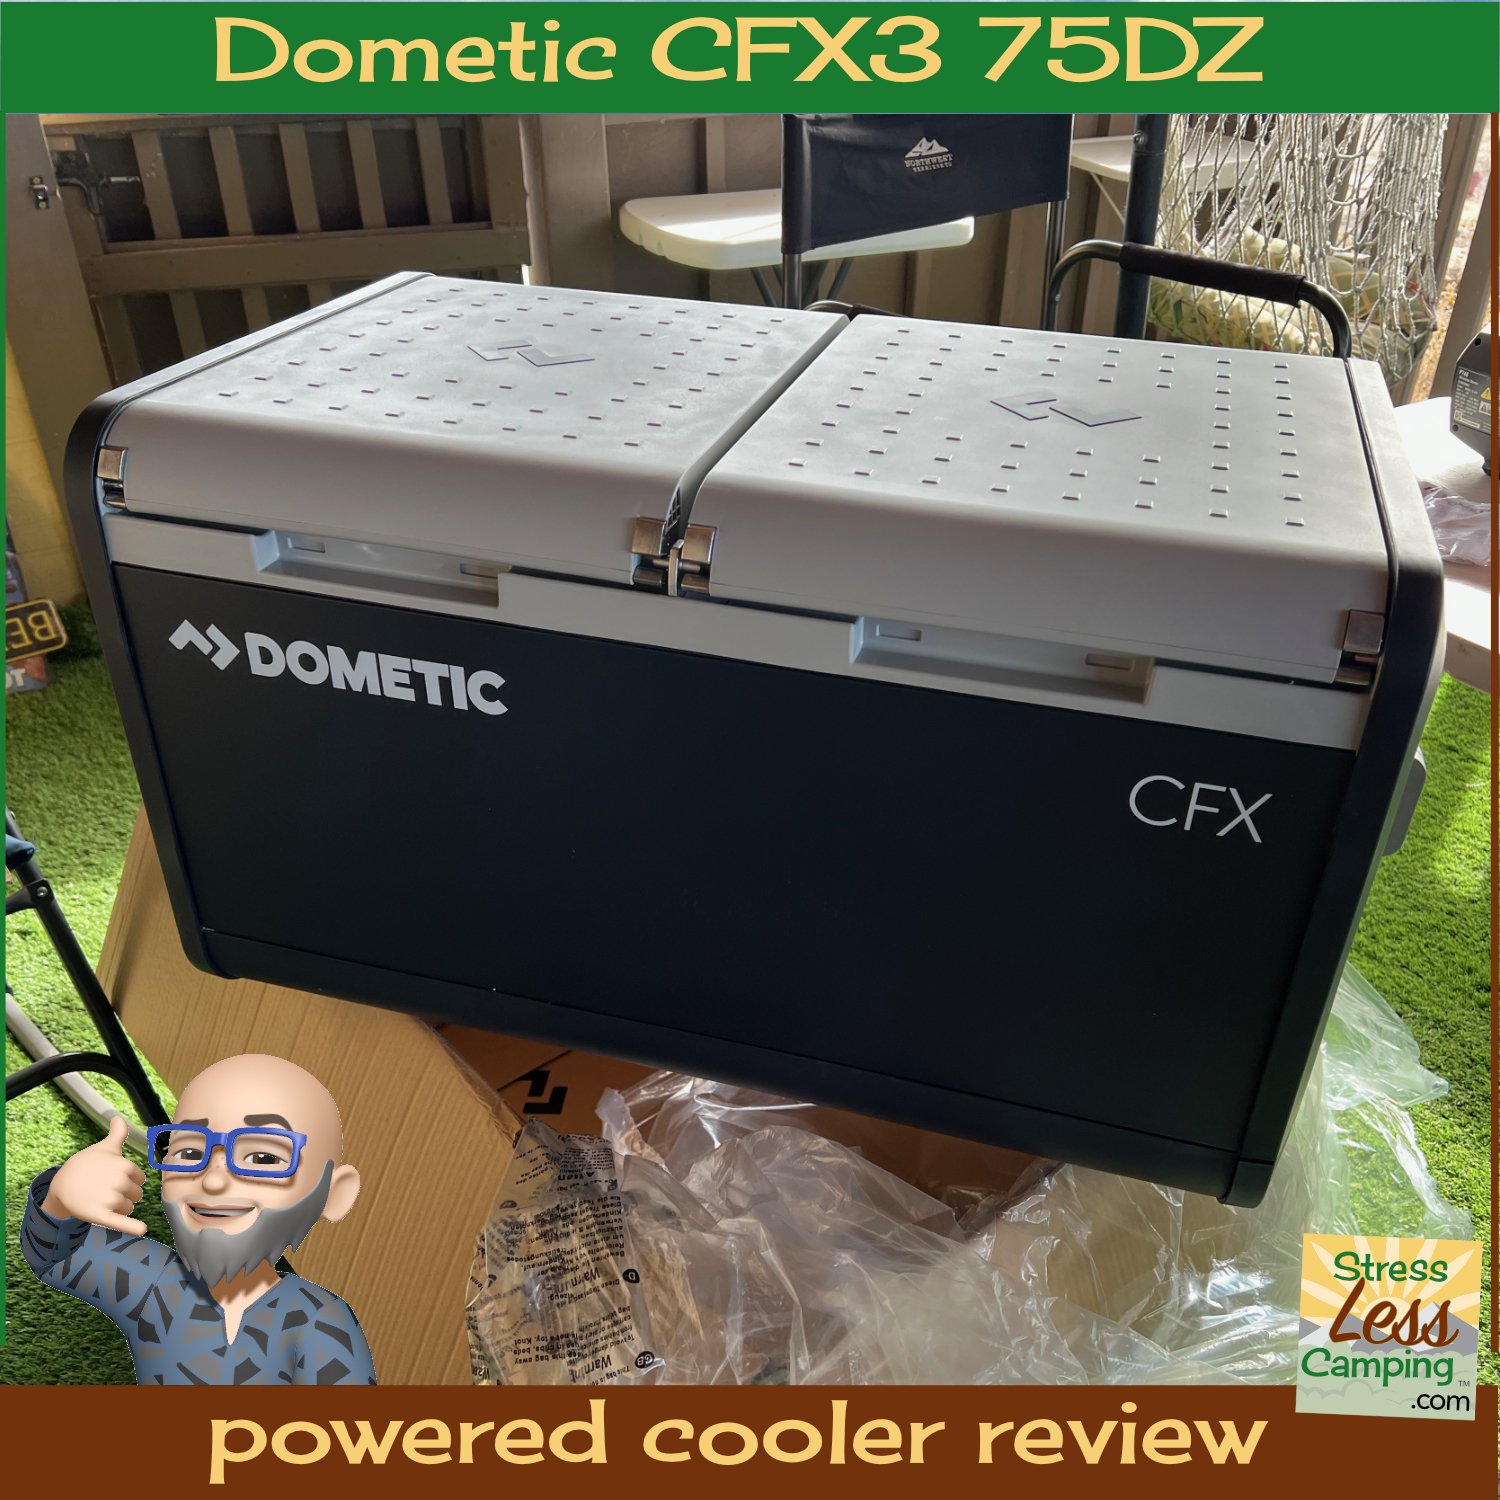 Full review of the Dometic CFX3 75DZ powered cooler - StressLess Camping